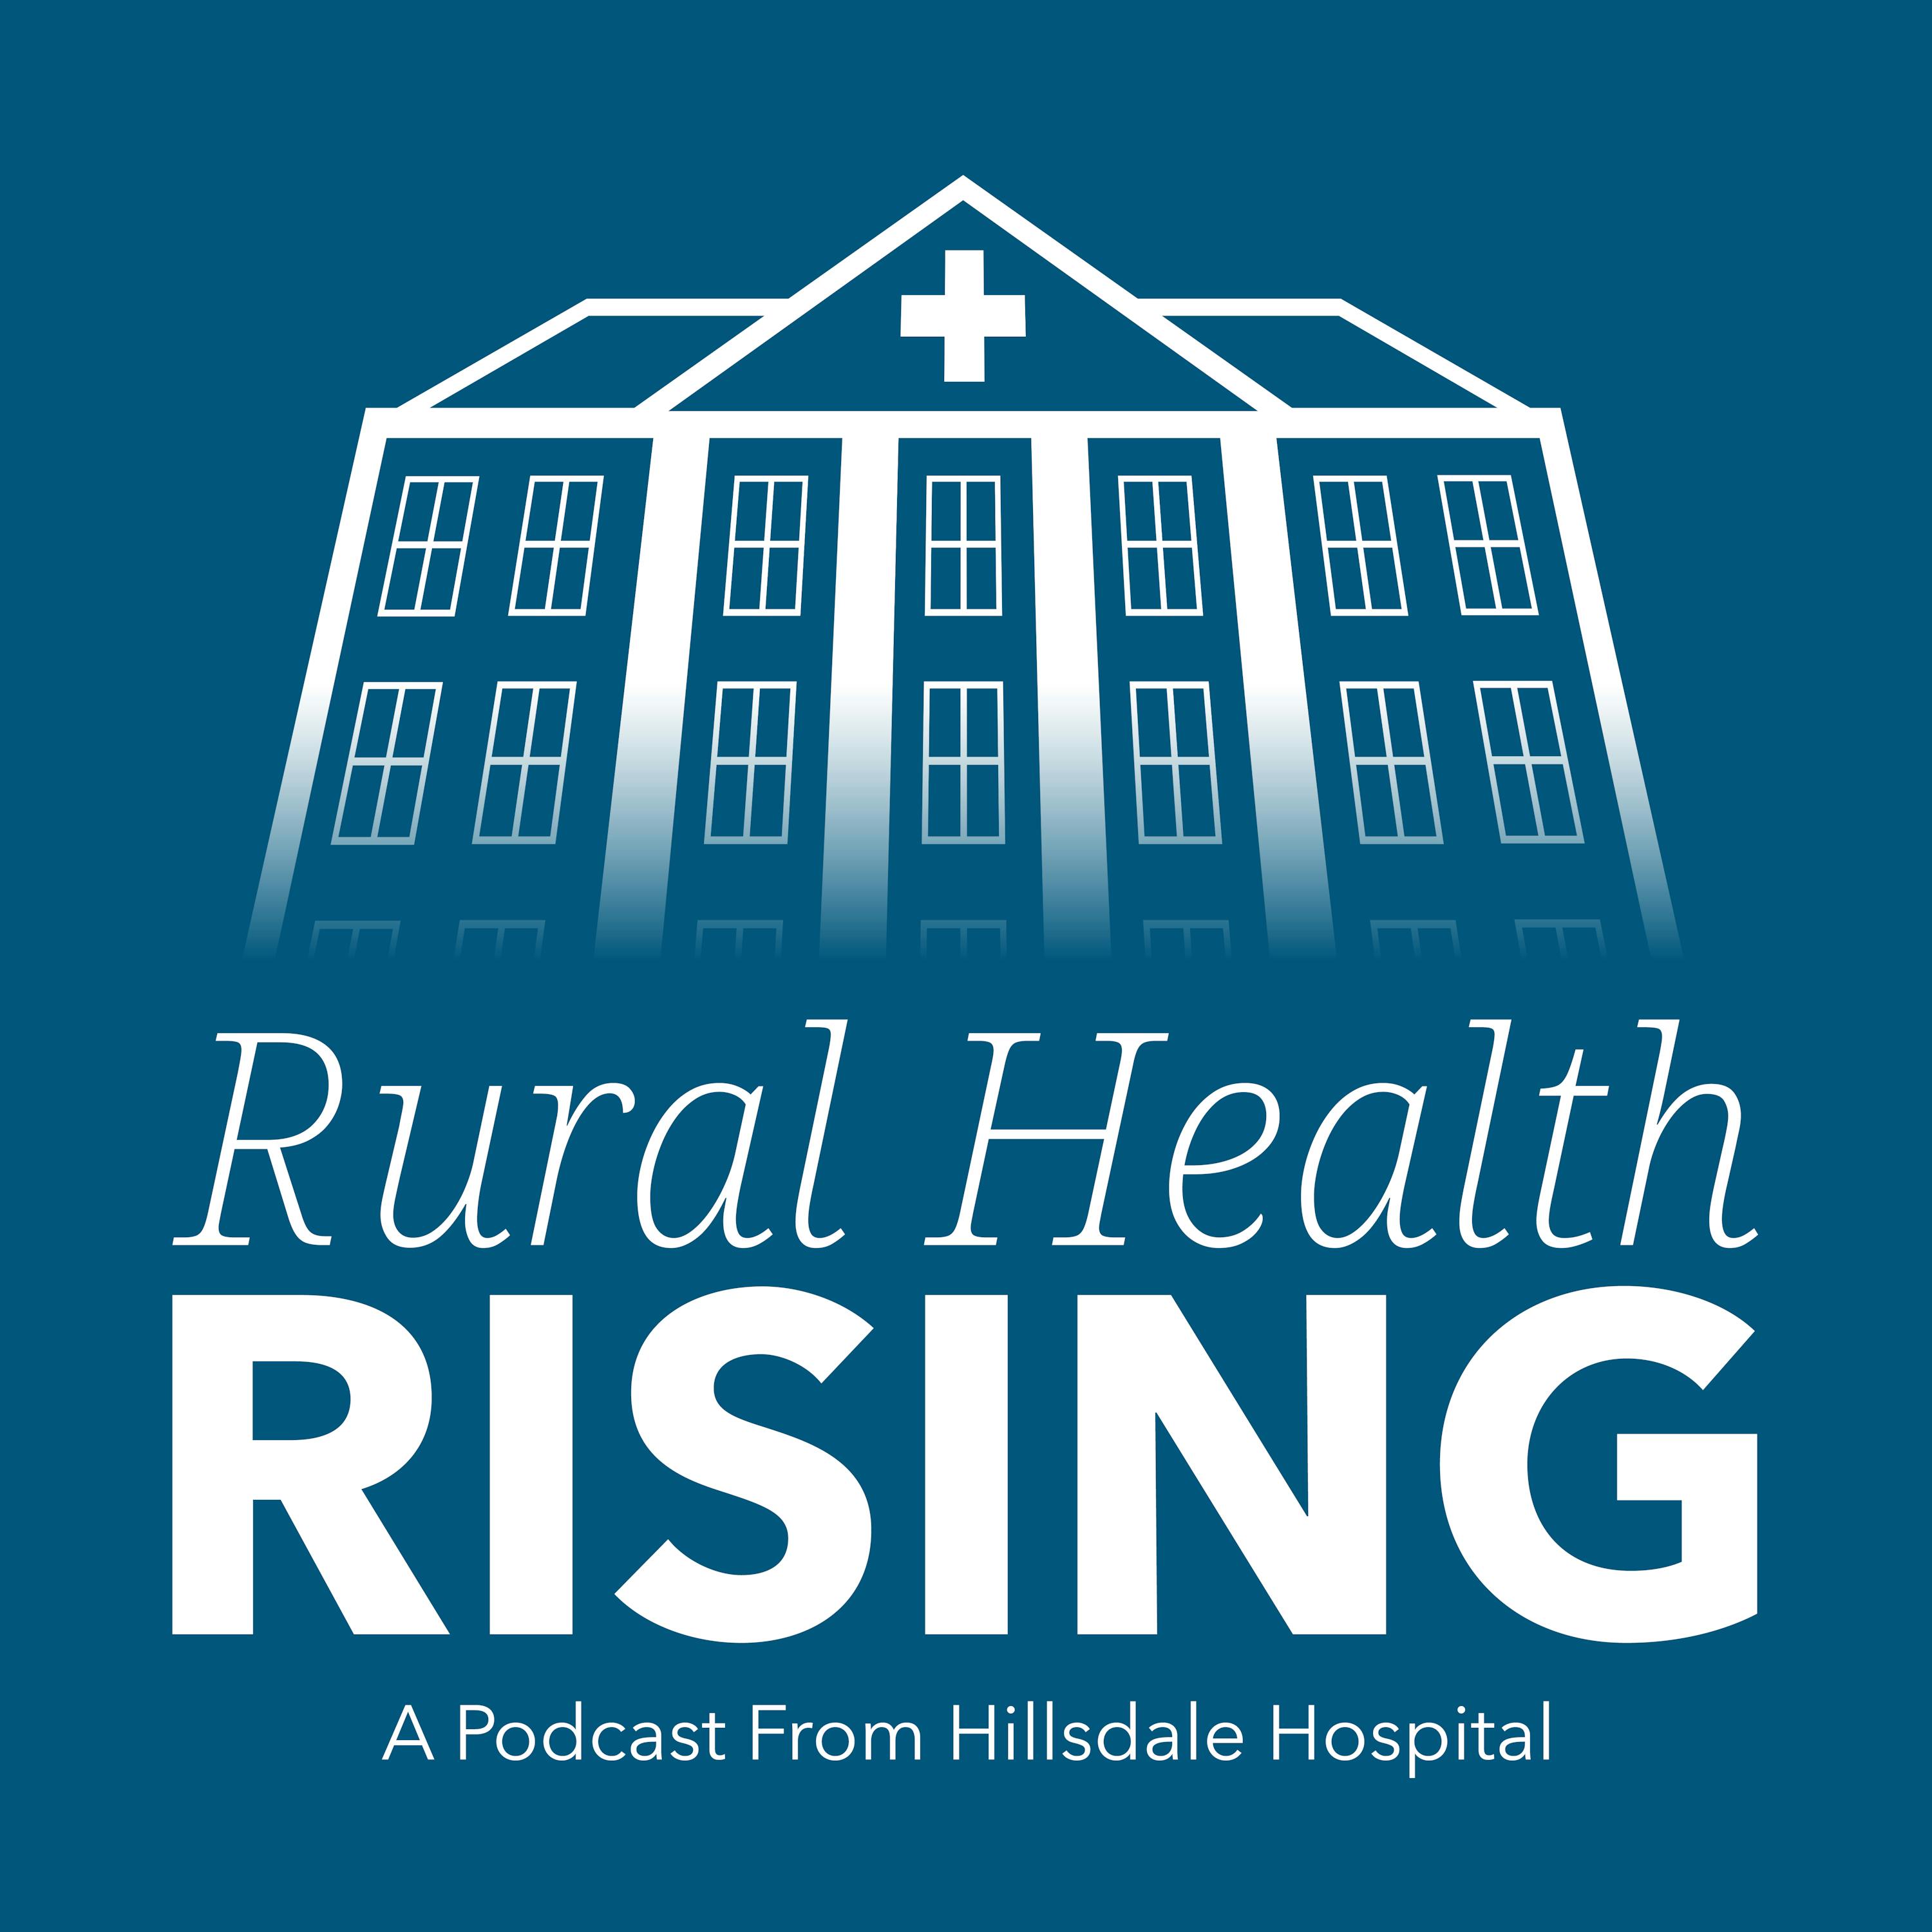 Episode 108: Expanding Access to Cancer Care in Rural America